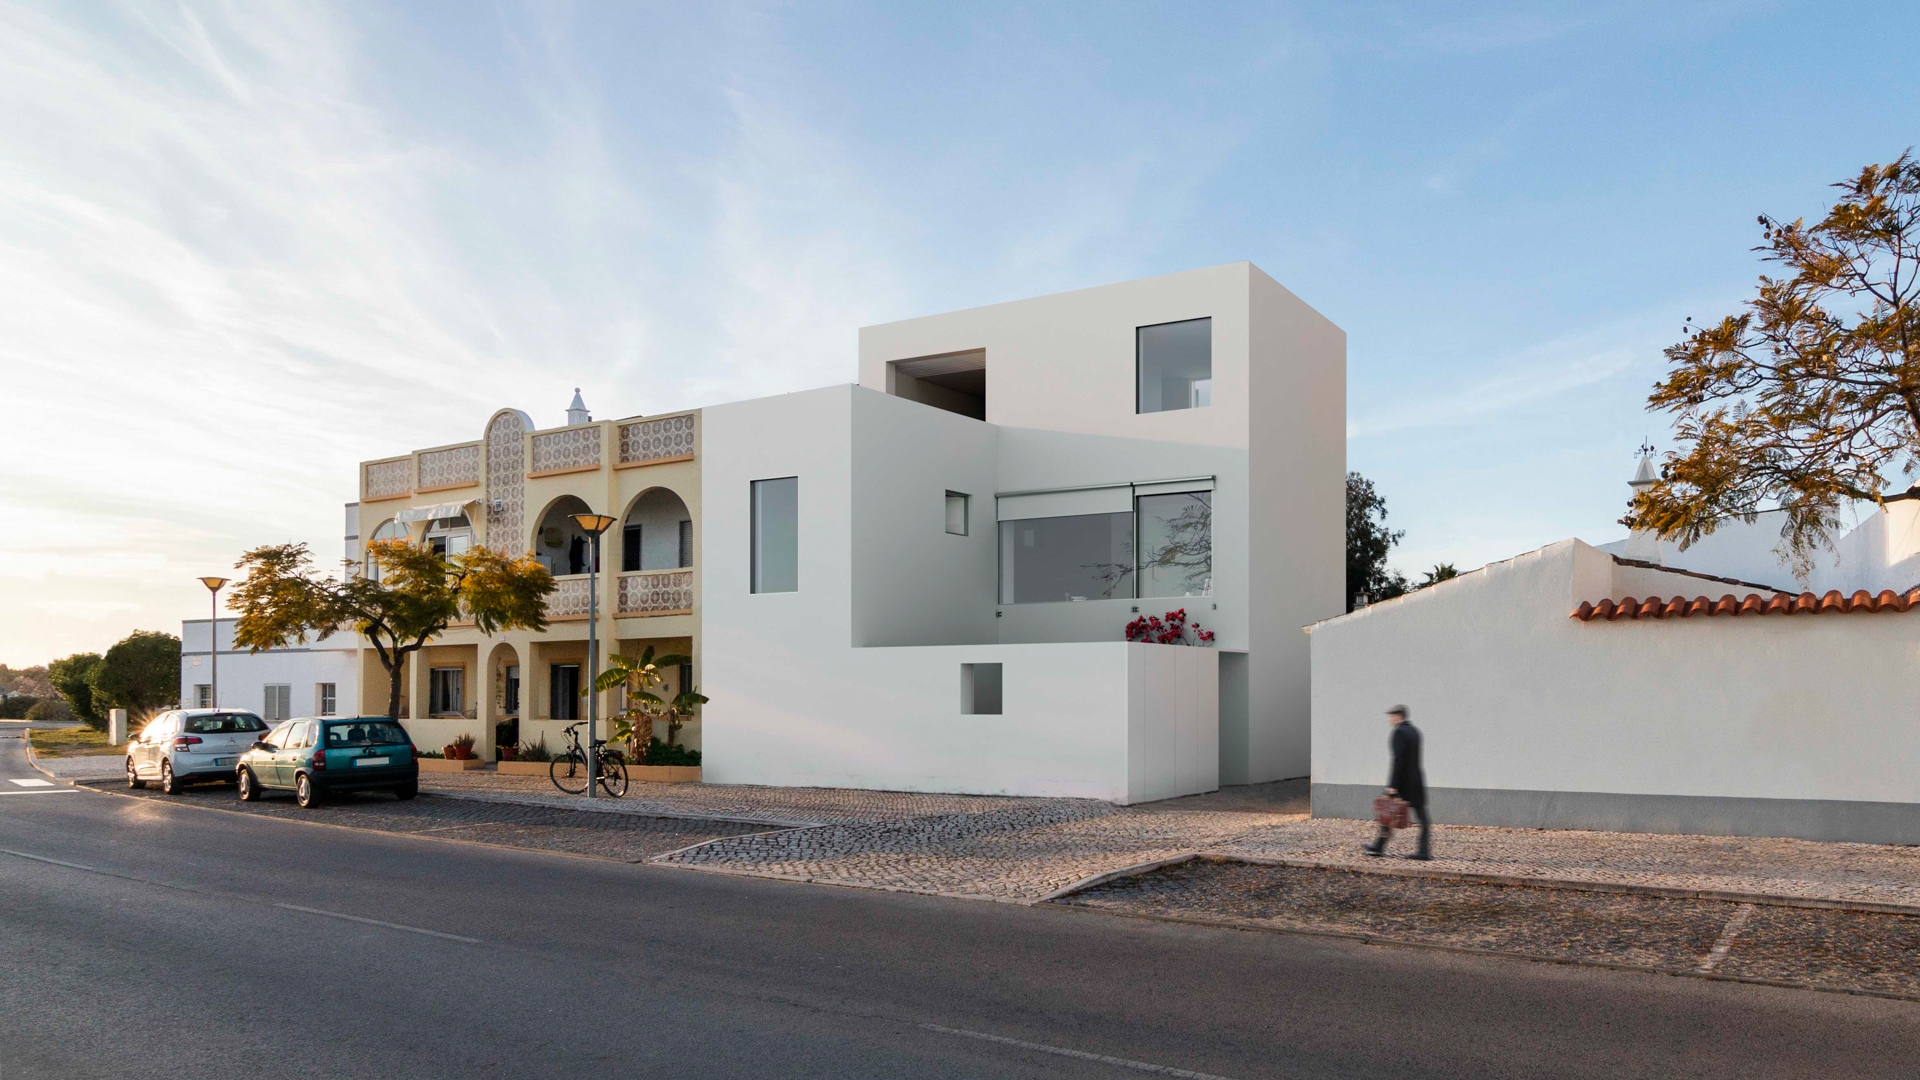 Under Construction: Frontline, 3-Bedroom Townhouse in Santa Luzia, with Sea and Ria Formosa Views | TV1795 An extraordinary opportunity to purchase a substantial, front-line townhouse property in Santa Luzia with superb views in this highly sought-after location on the Ria Formosa.